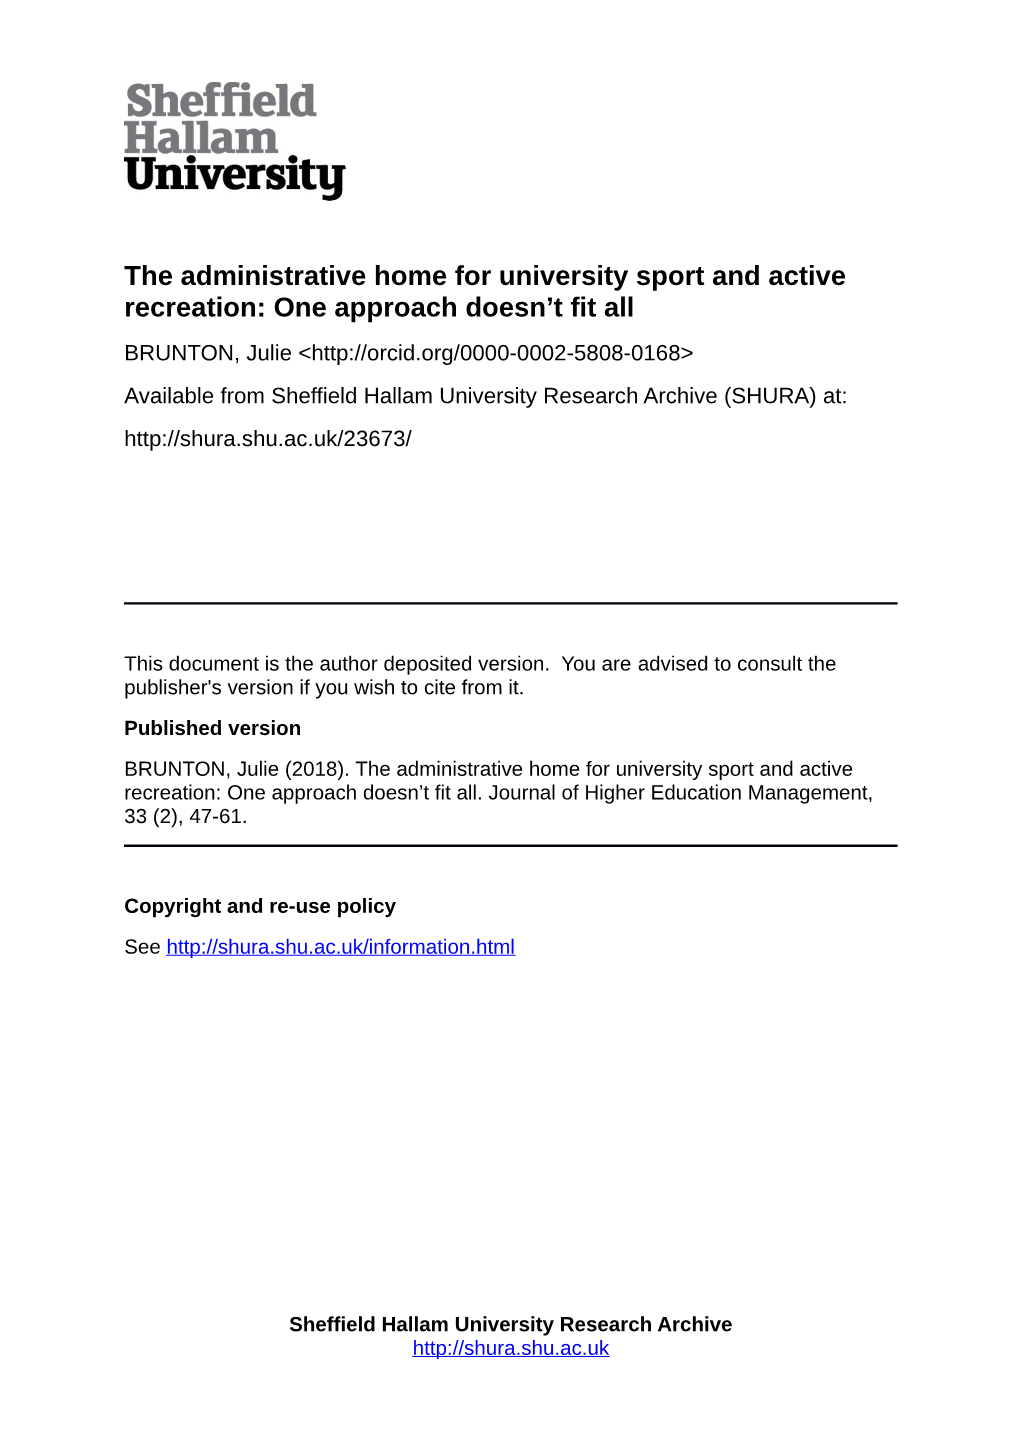 The Administrative Home for University Sport and Active Recreation: One